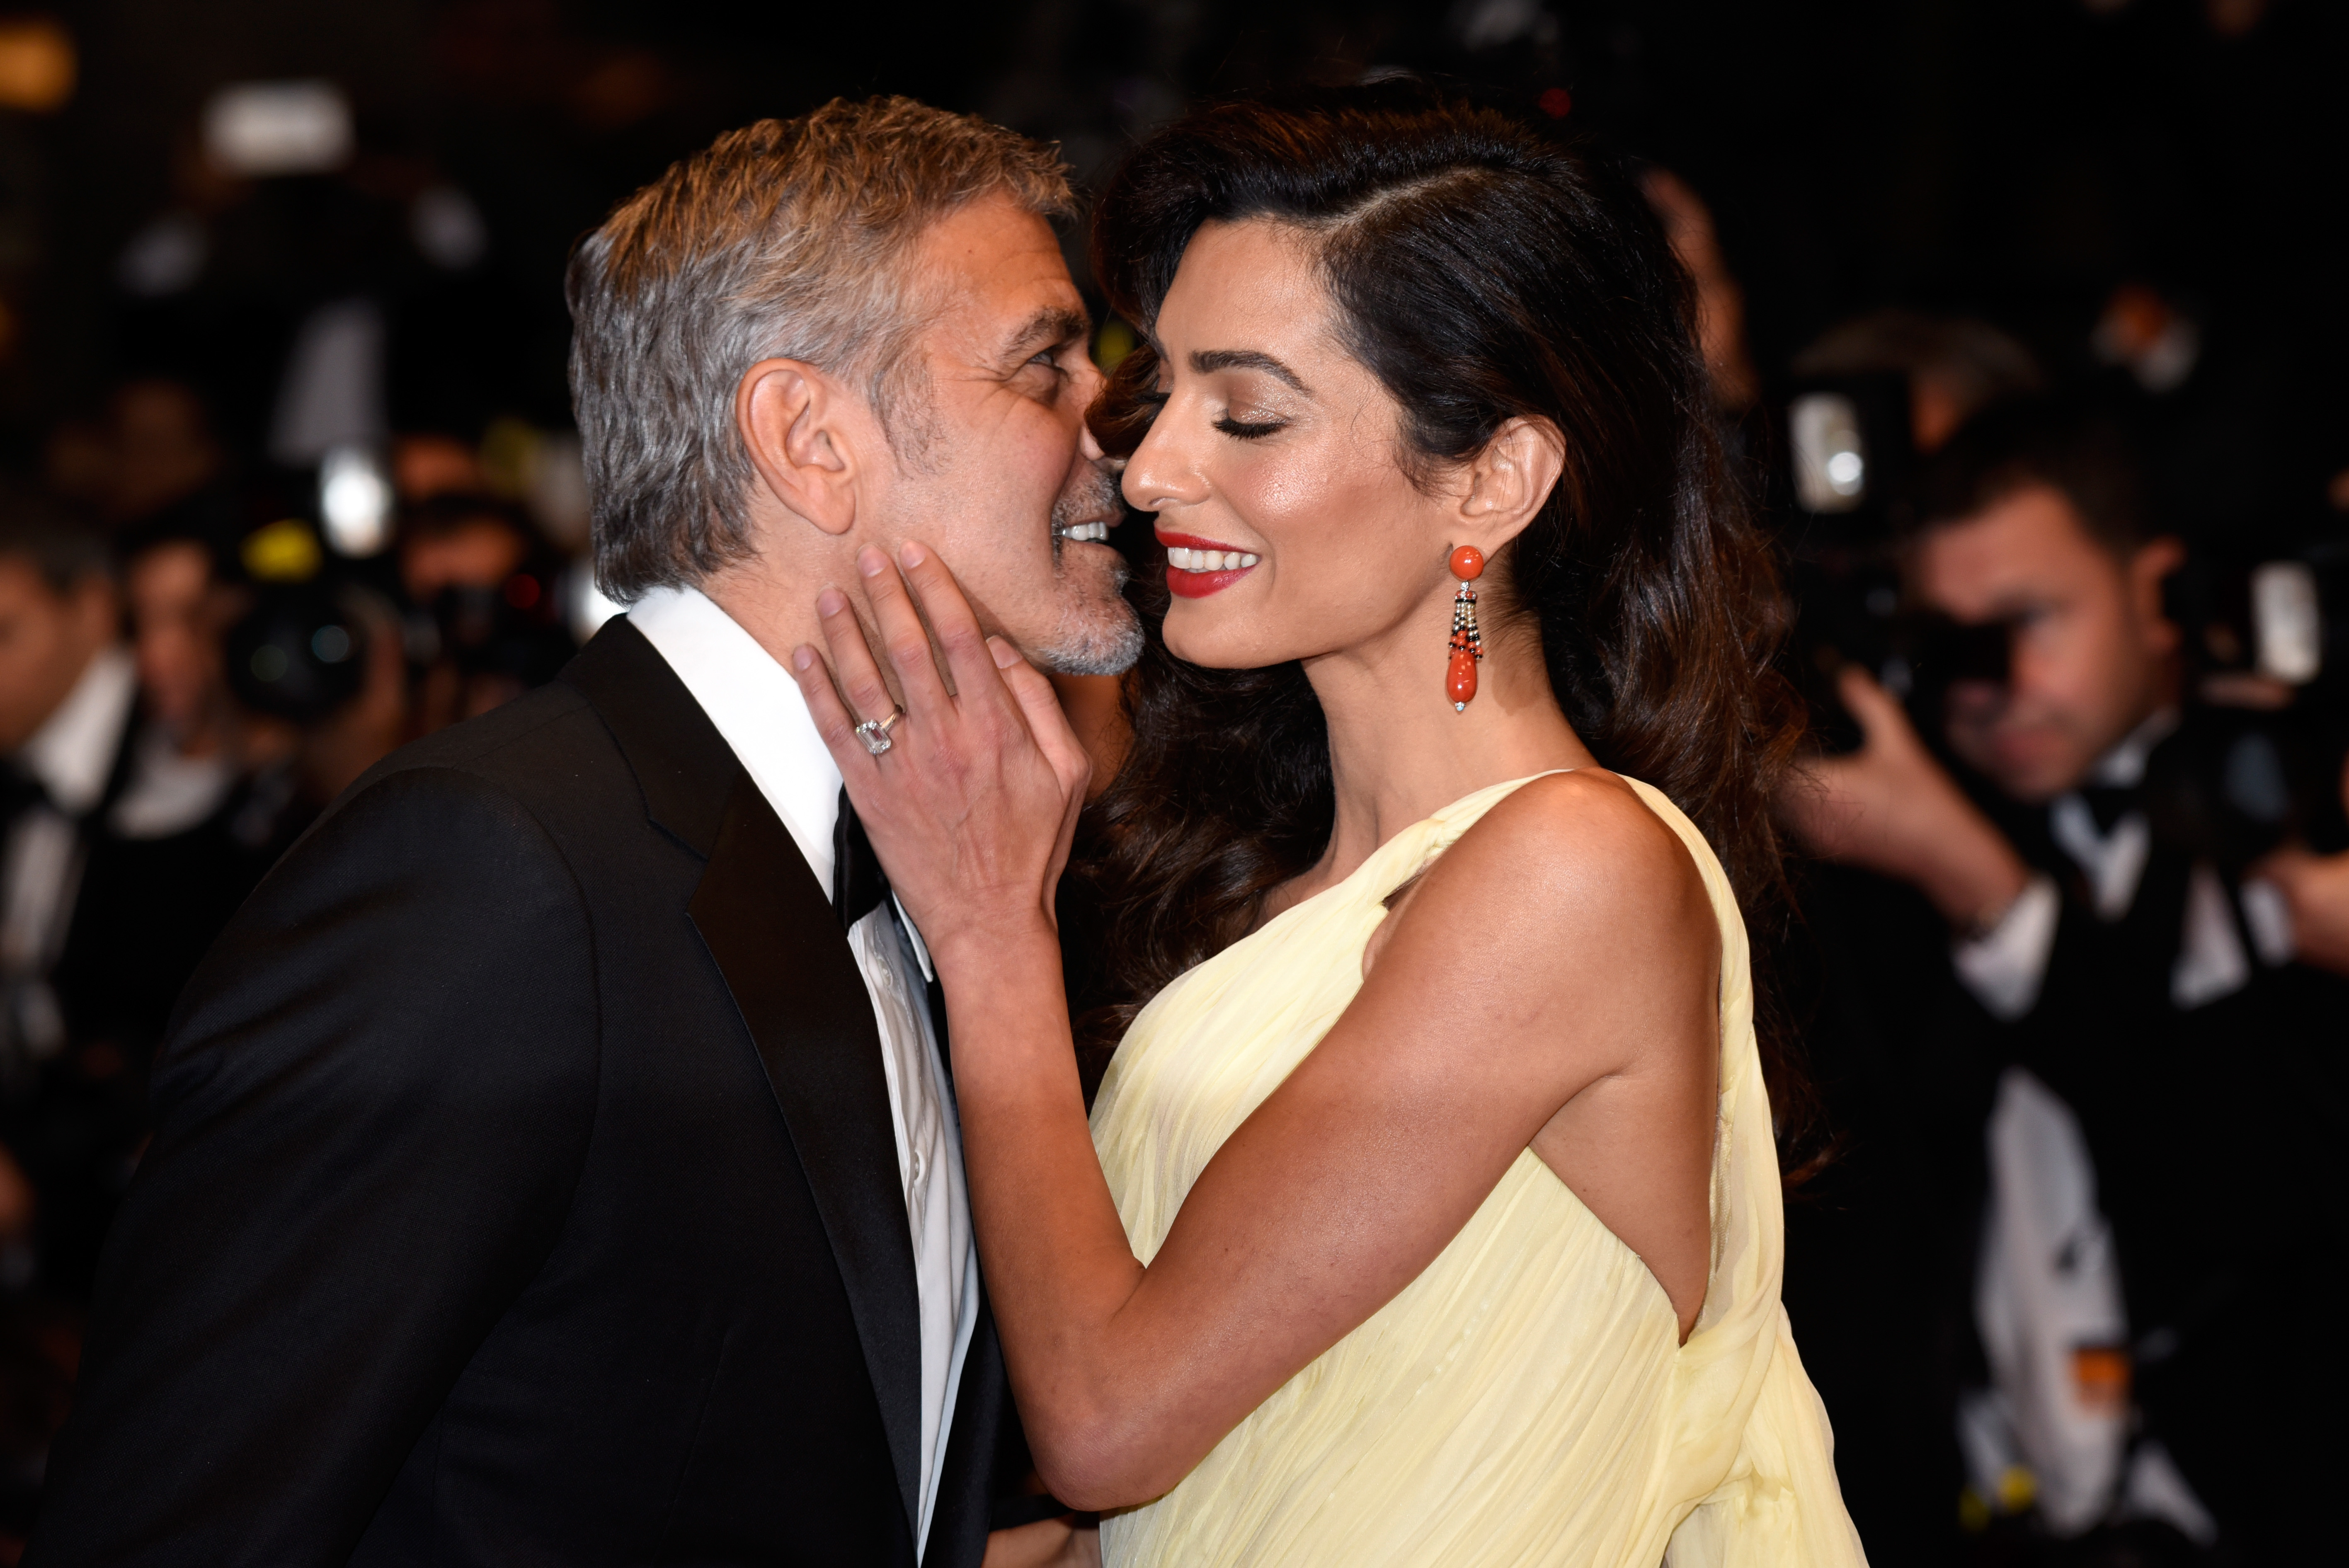 George Clooney and Amal Clooney attend the "Money Monster" premiere during the 69th Annual Cannes Film Festival at the Palais des Festivals on May 12, 2016 in Cannes, France | Source: Getty Images